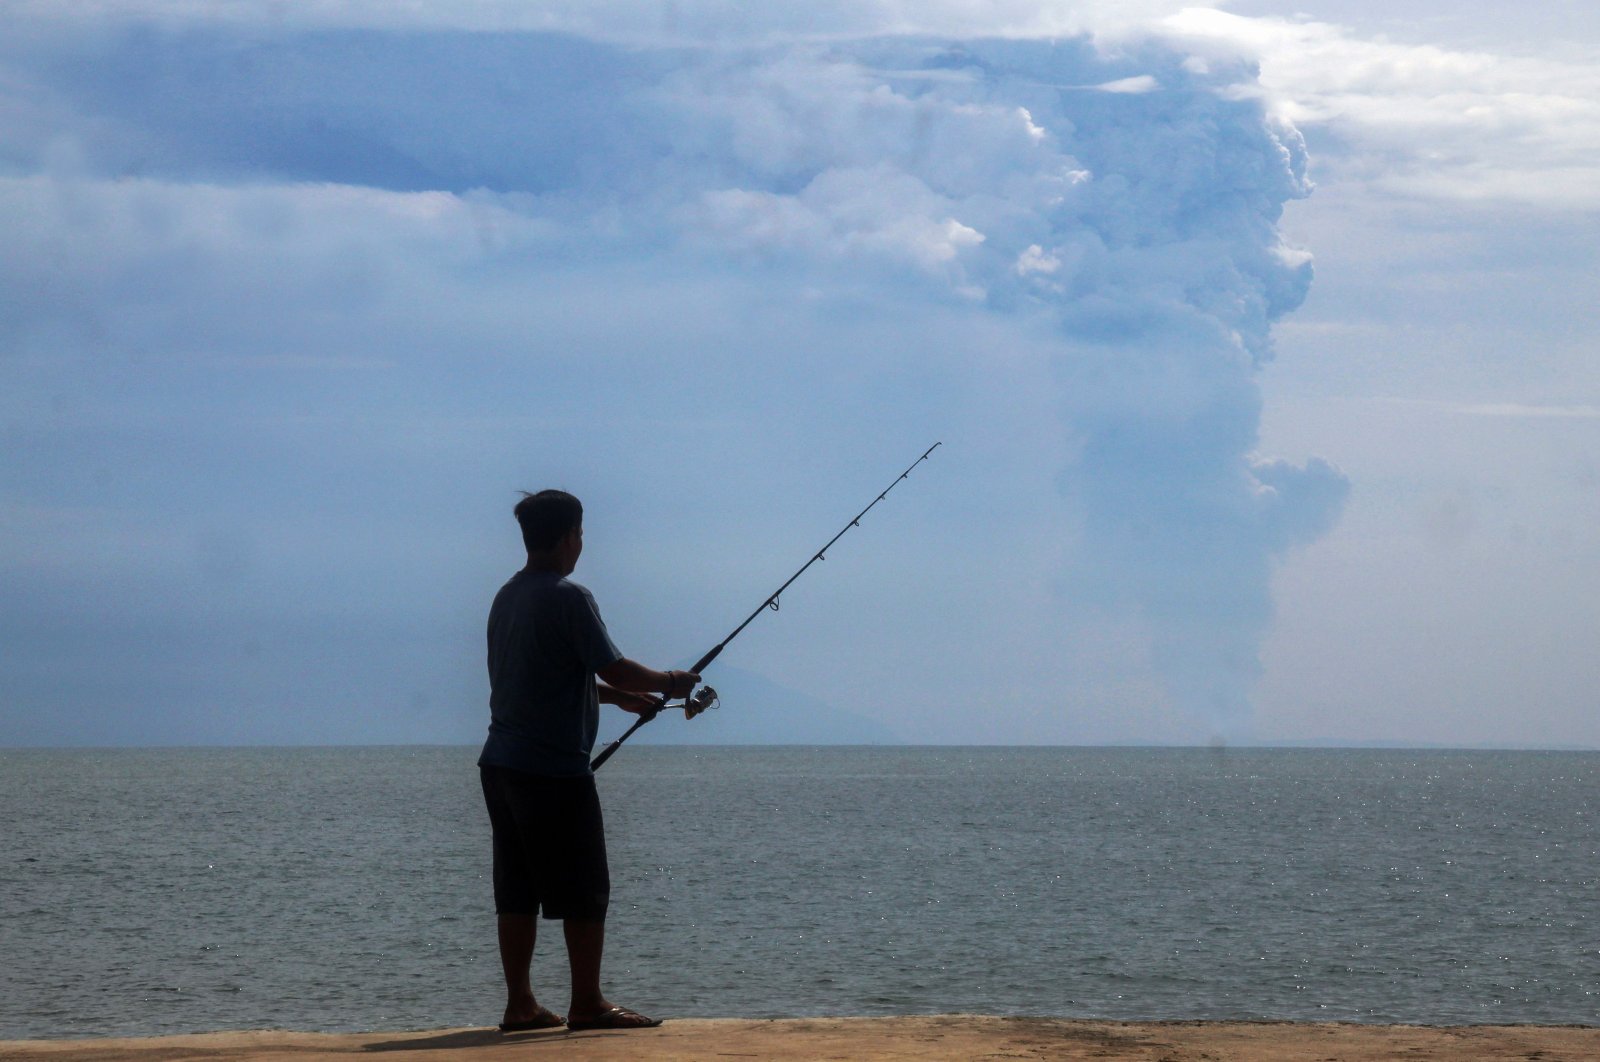 A man fishes at Pasauran beach, Anyer in Serang on April 24, 2022 while Mount Anak Krakatau spews thick smoke into the air. (AFP Photo)